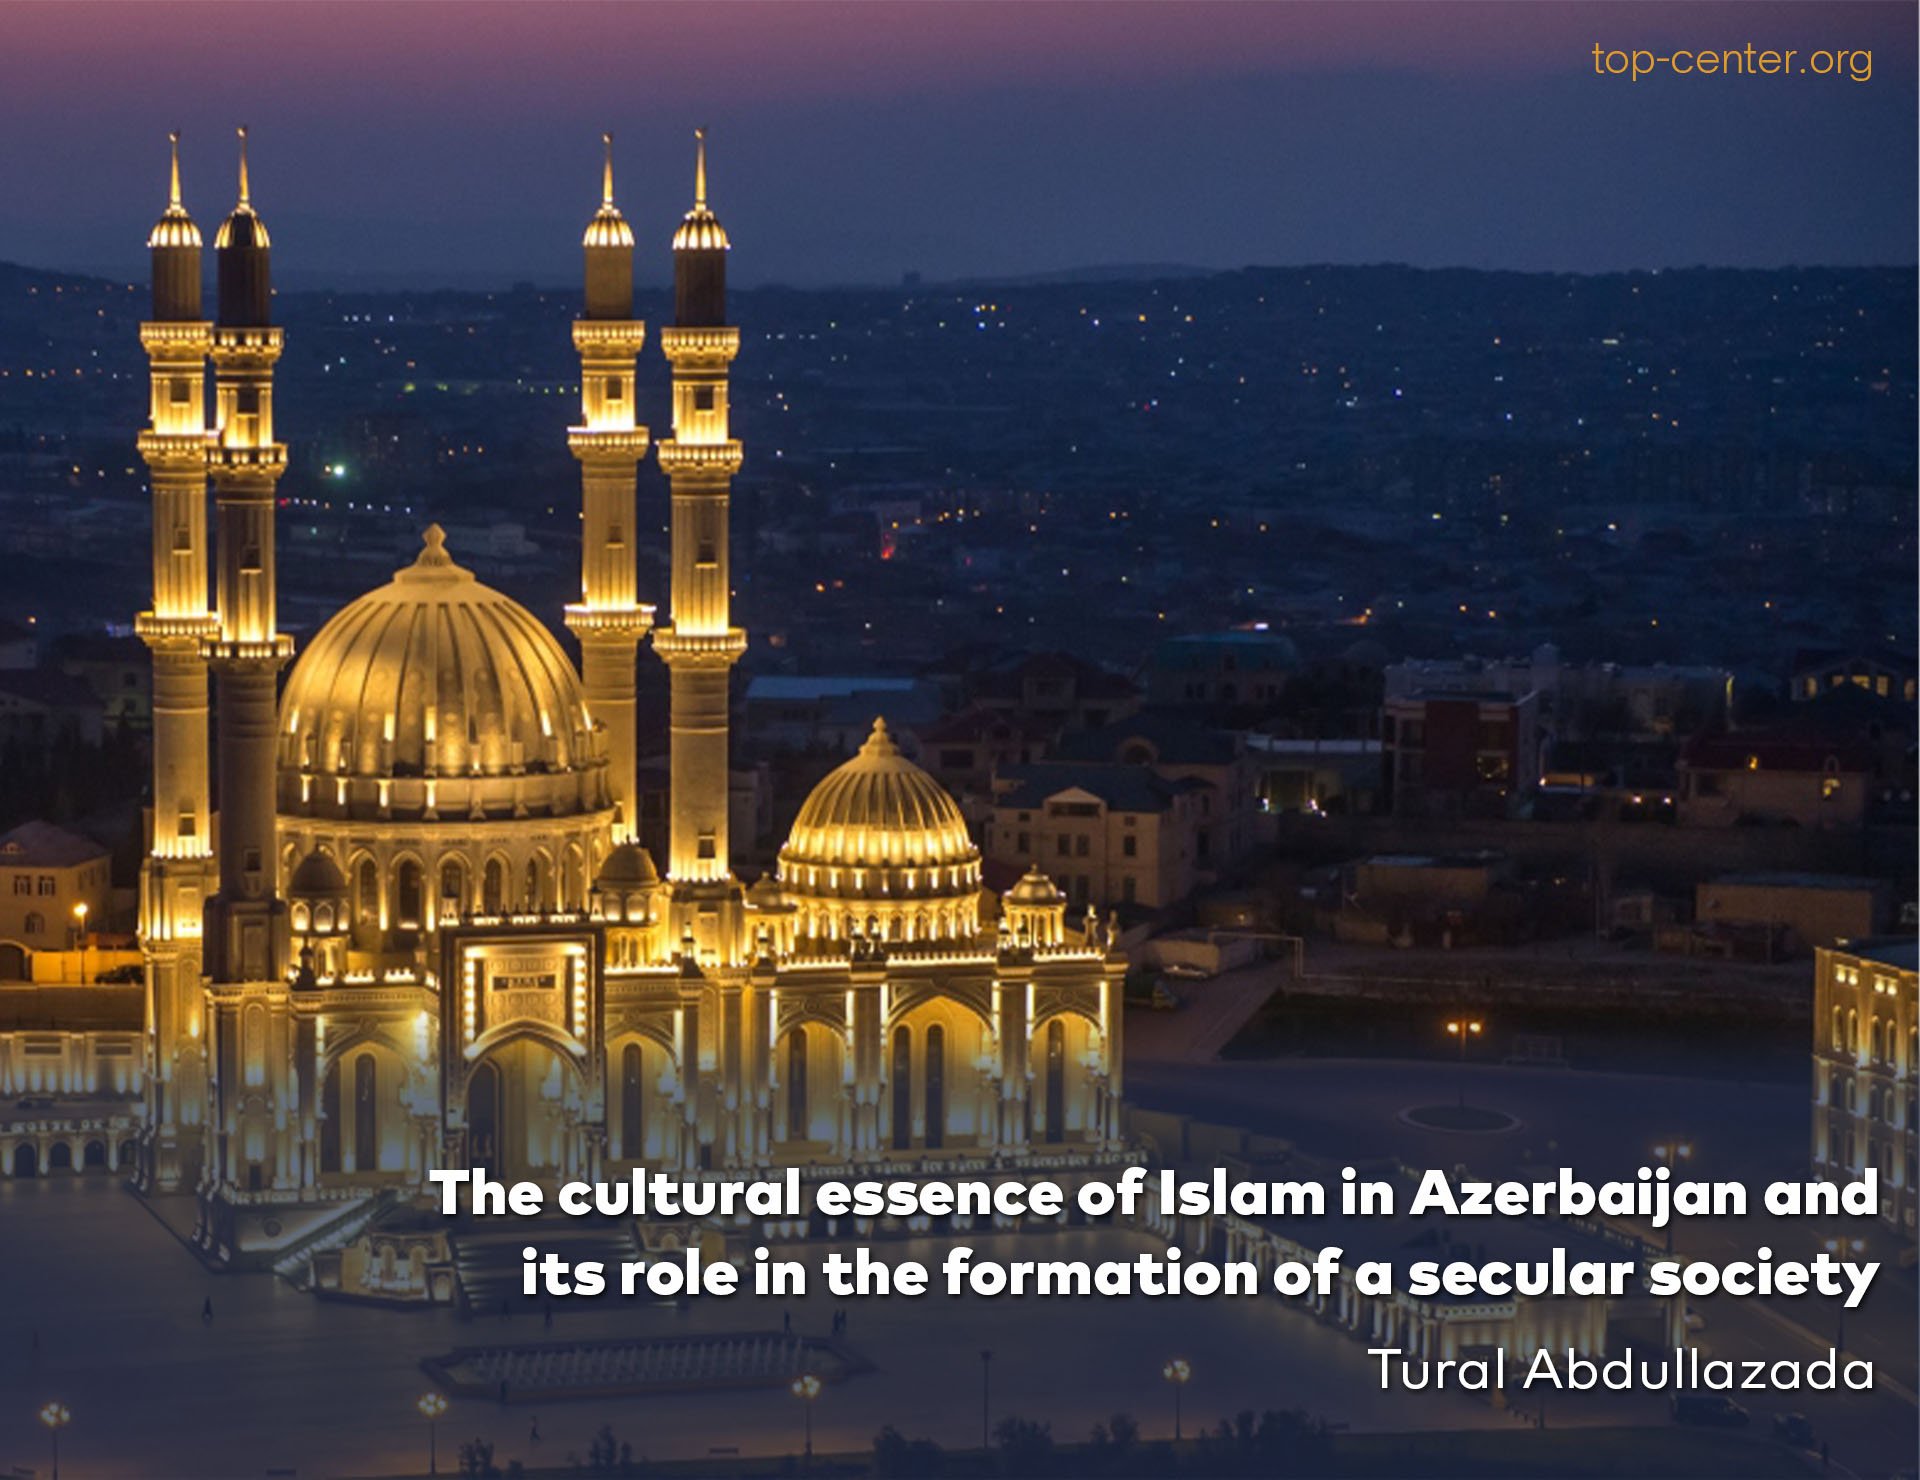 The cultural essence of Islam in Azerbaijan and its role in the formation of a secular society